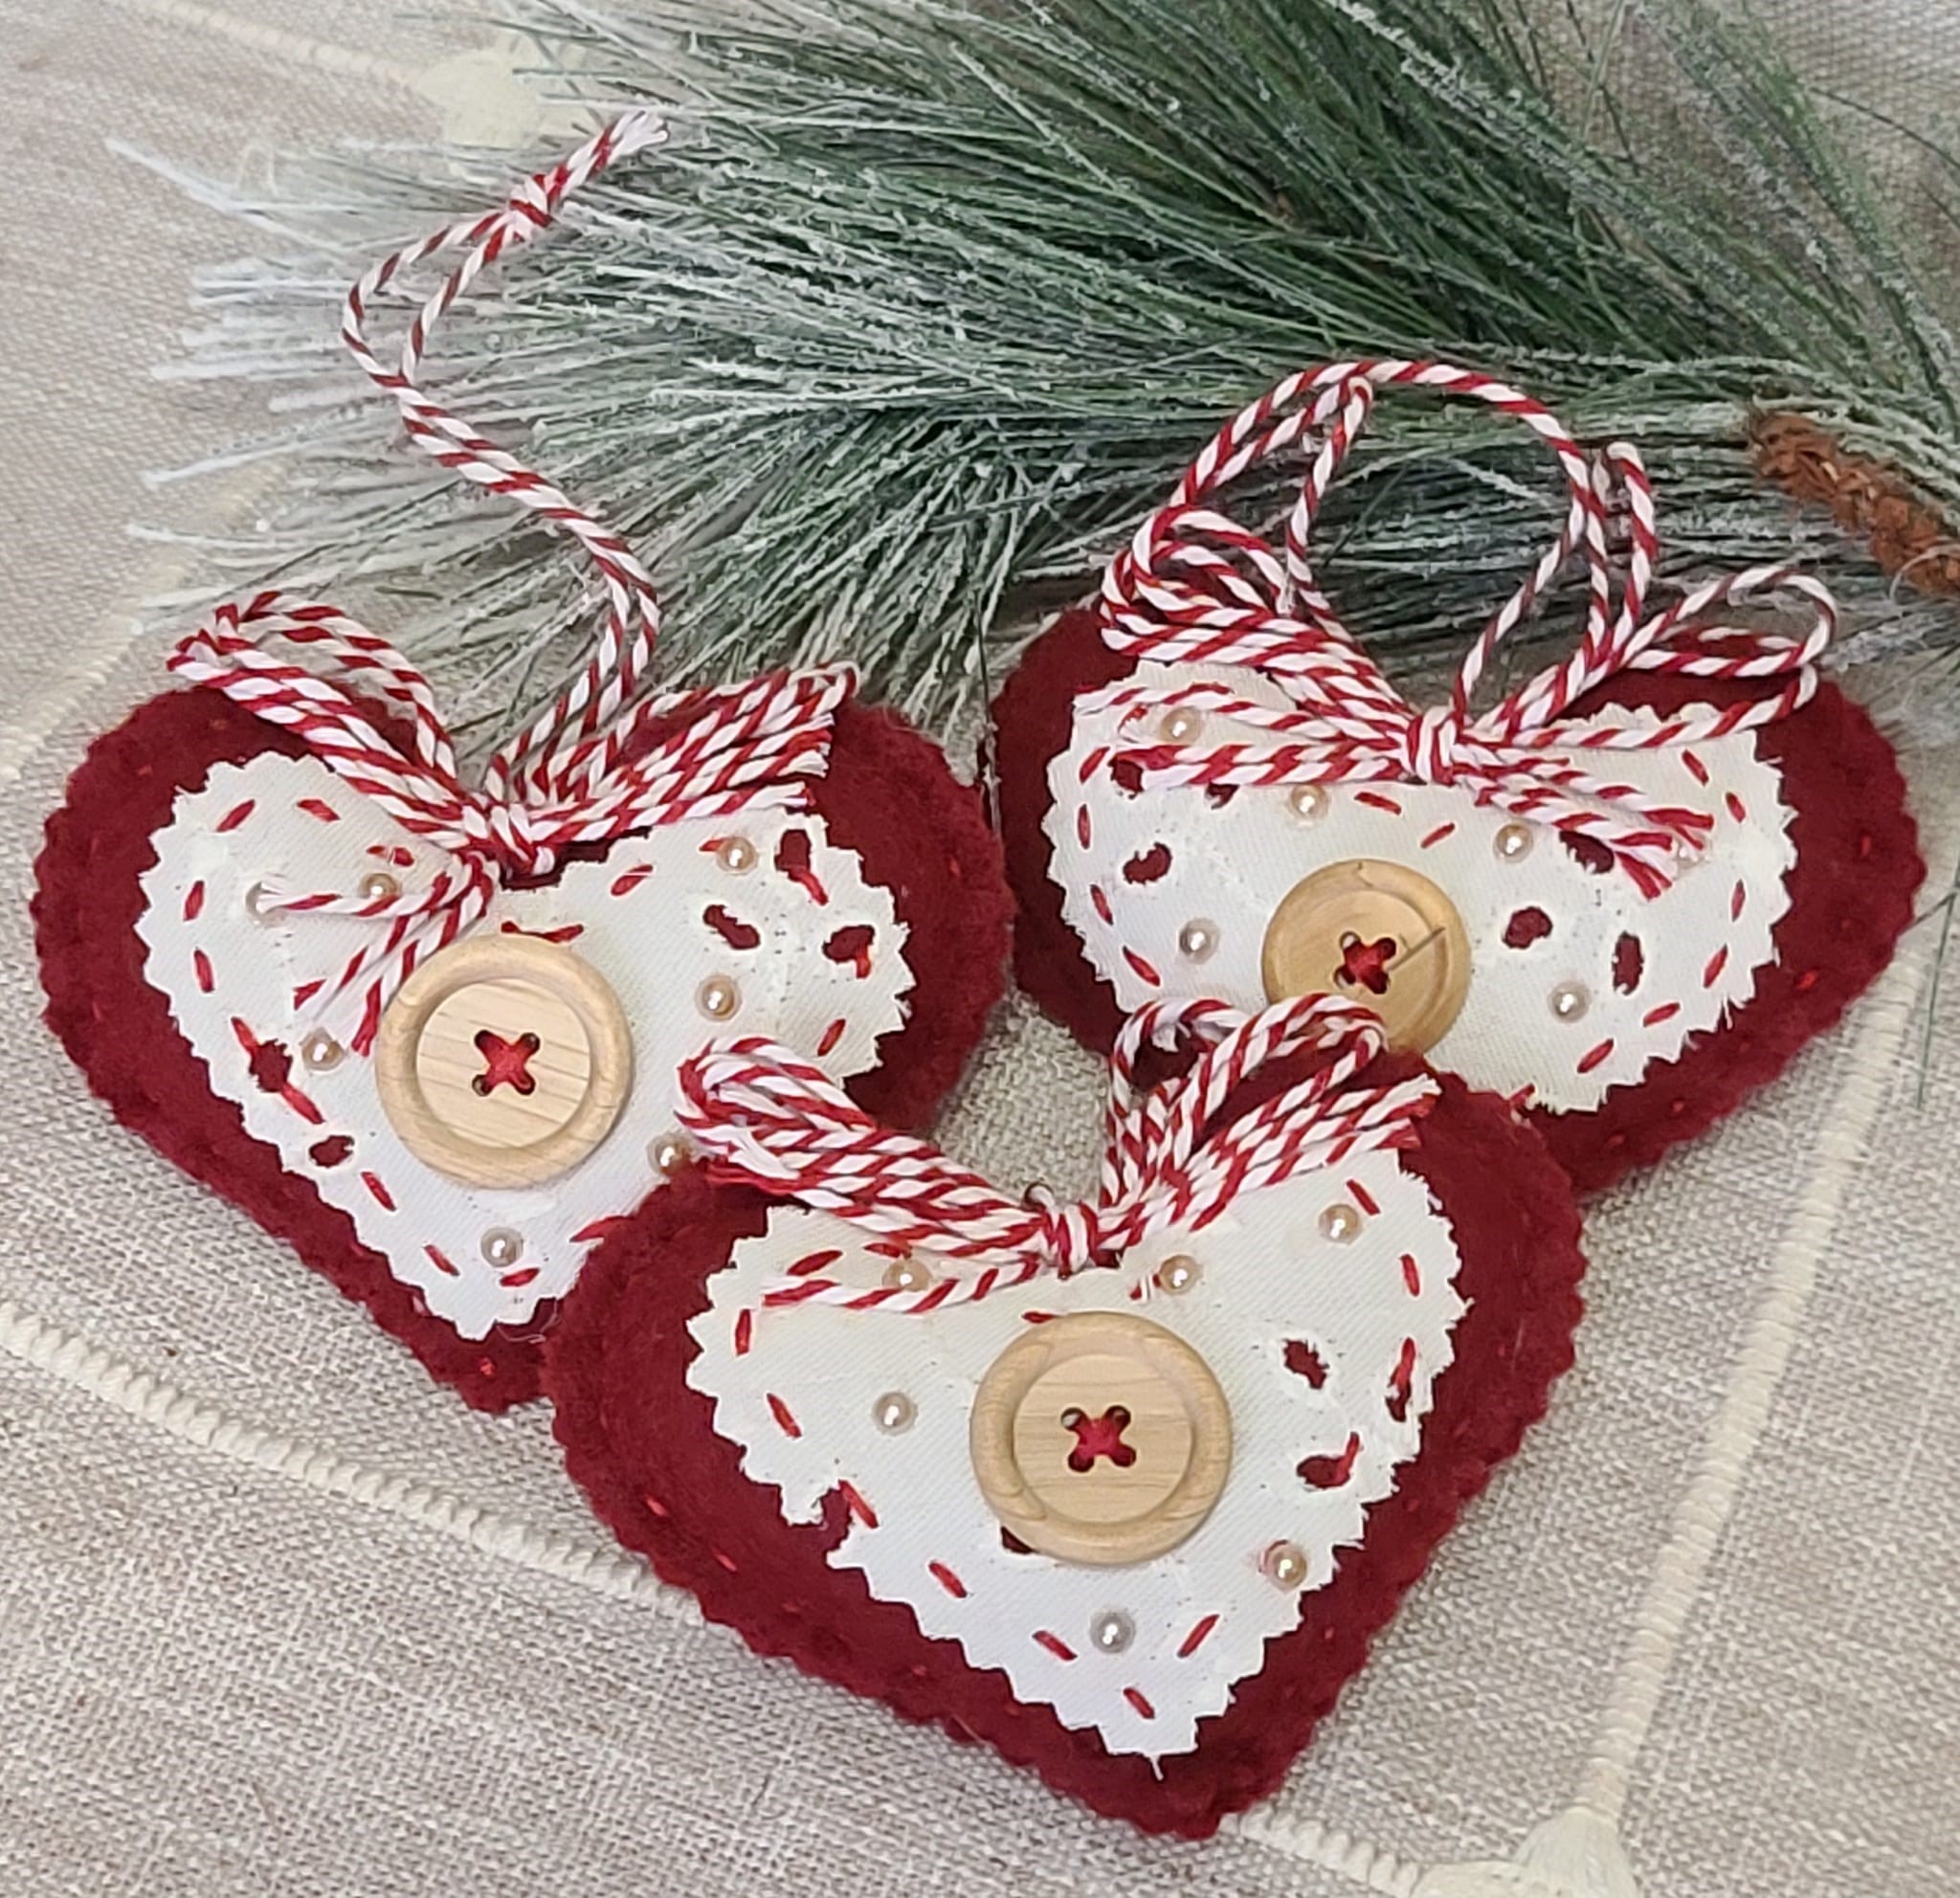 Valentine Day ornaments, handmade, red felt and lace hearts, bowl filler, heart ornaments, set of f3